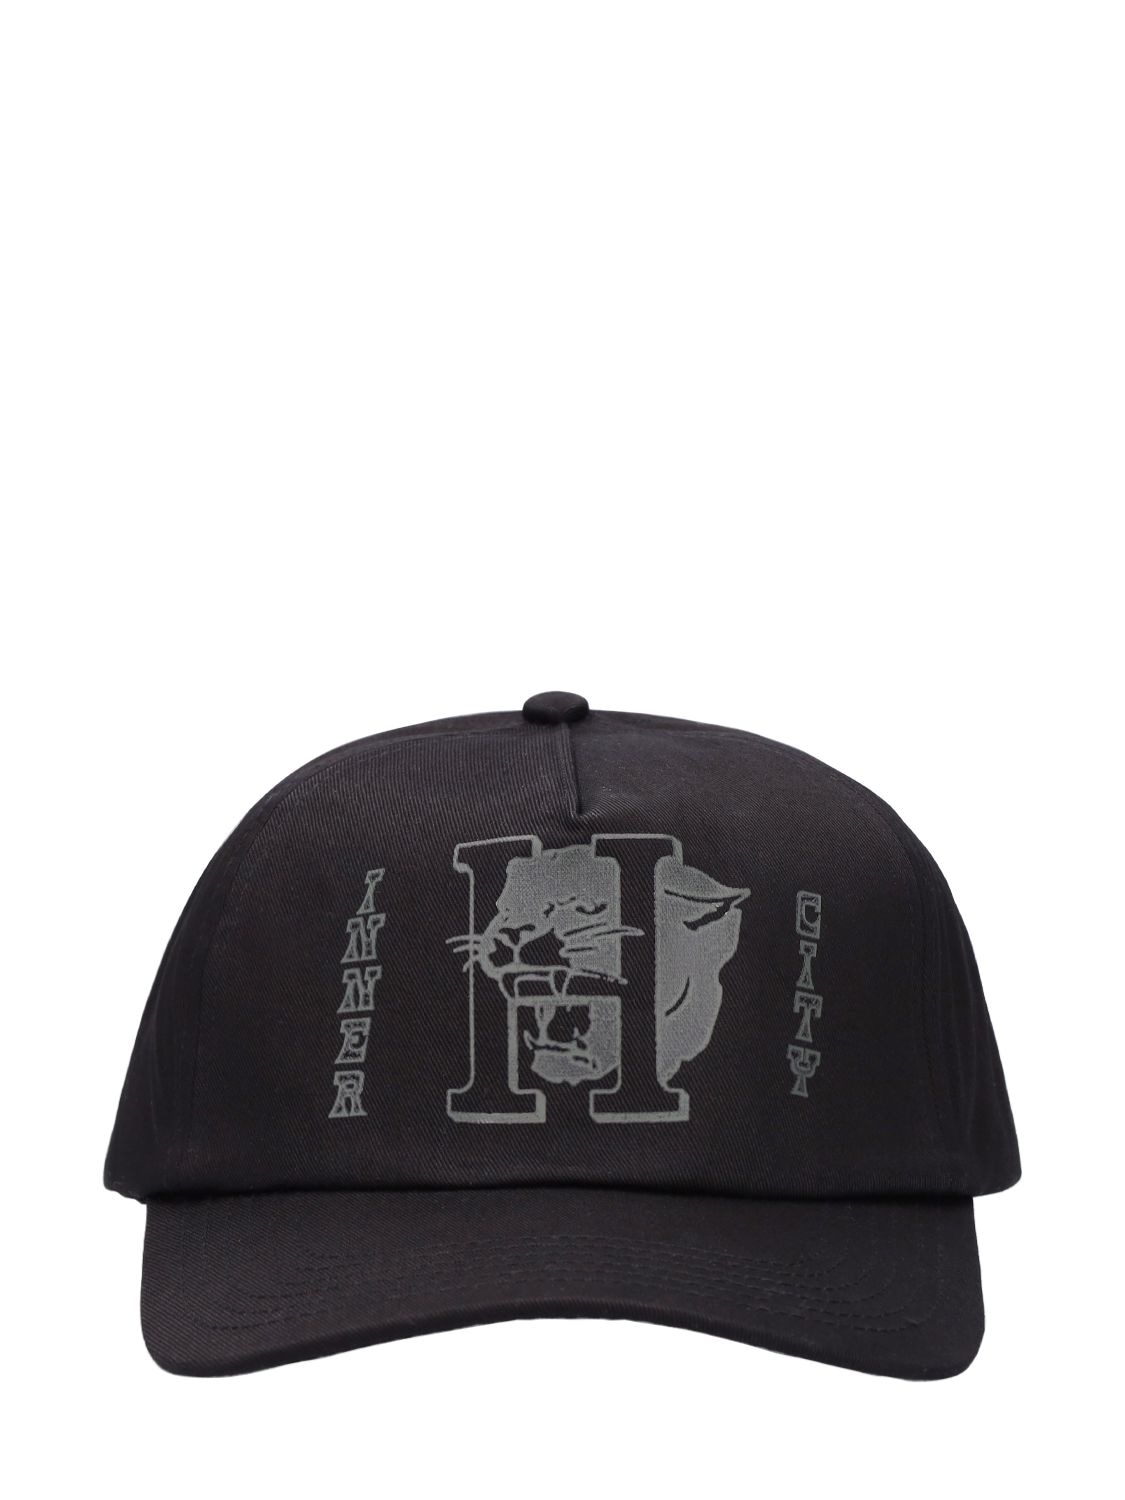 HONOR THE GIFT PANTHER LOGO COTTON CAP